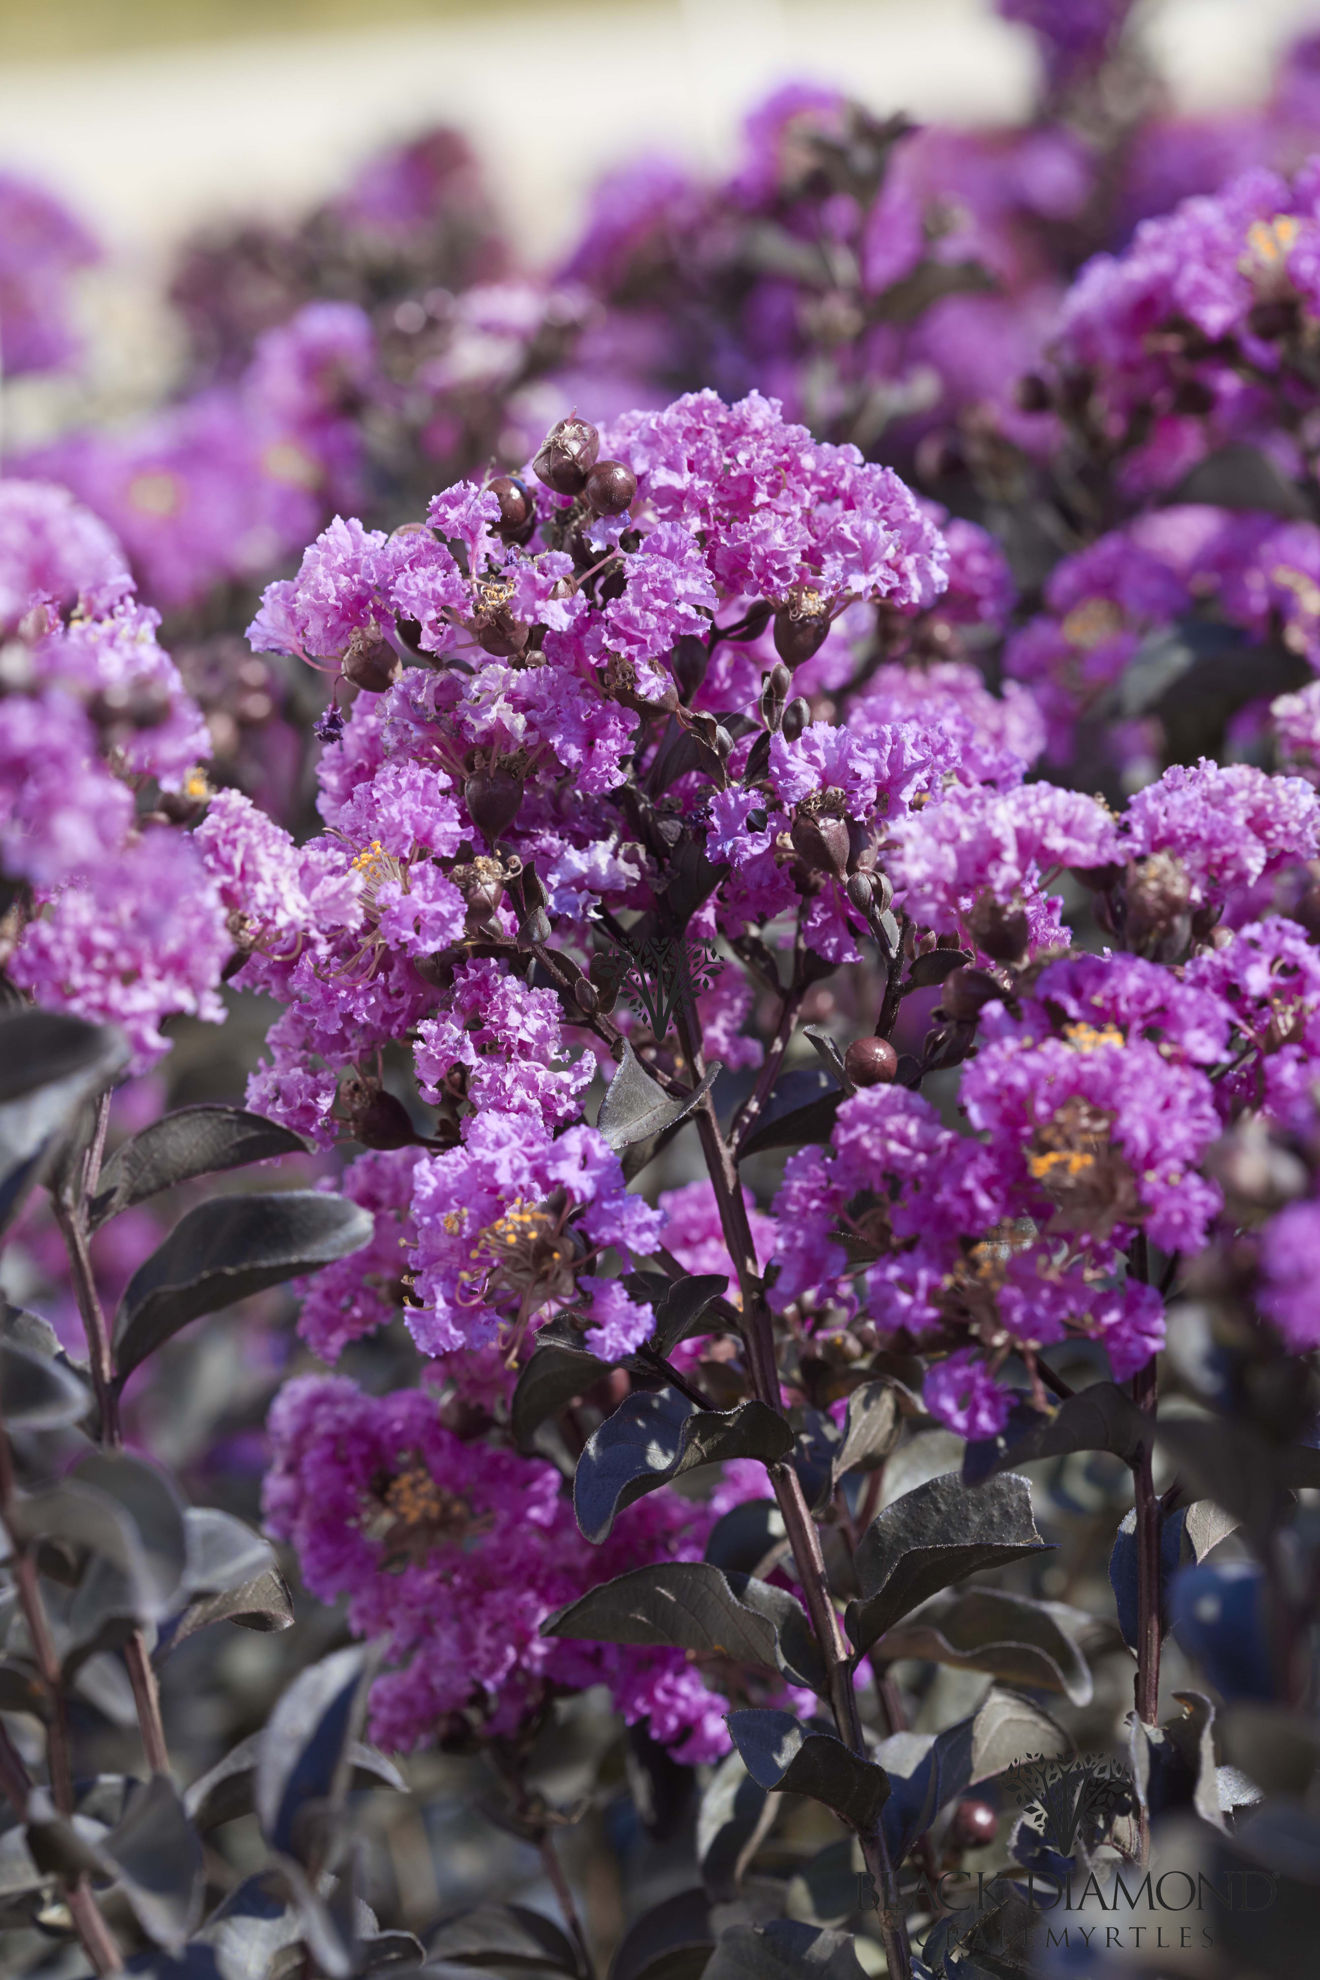 http://www.breederplants.nl/images/thumbs/0002025_Lagerstroemia 'Purely Purple' (1).jpeg